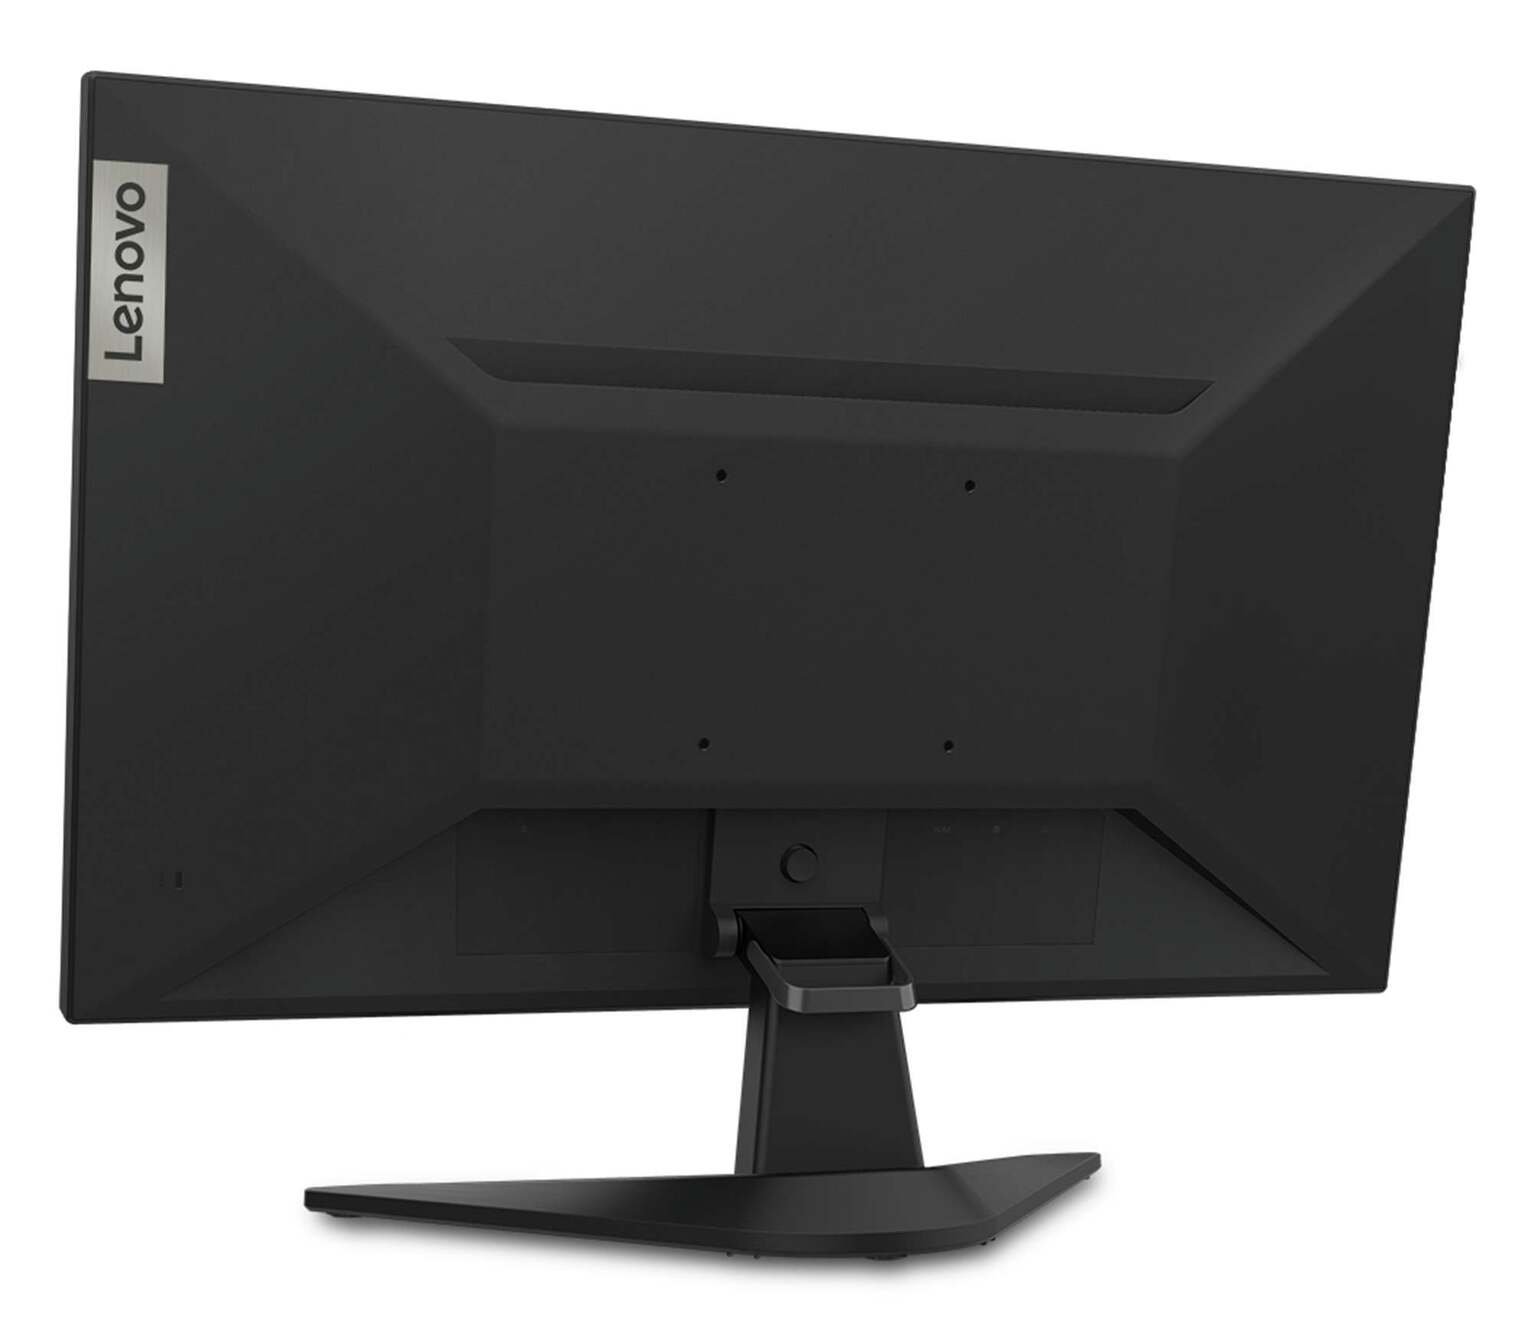 Lenovo G24-10 23.6in 144Hz FHD Monitor Review